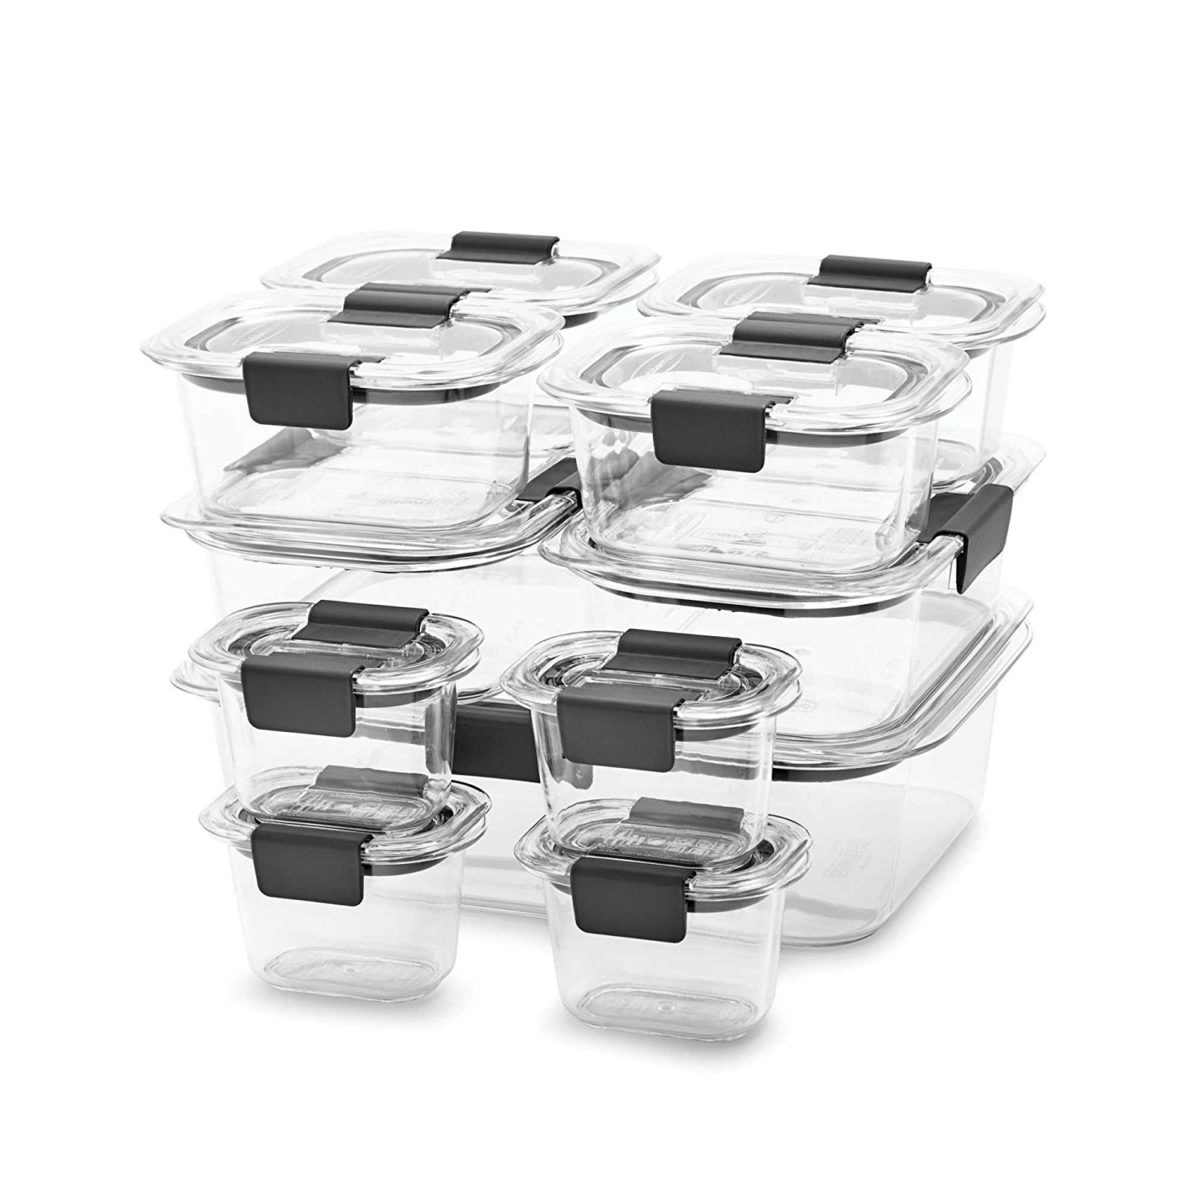 Rubbermaid Brilliance Leakproof Containers